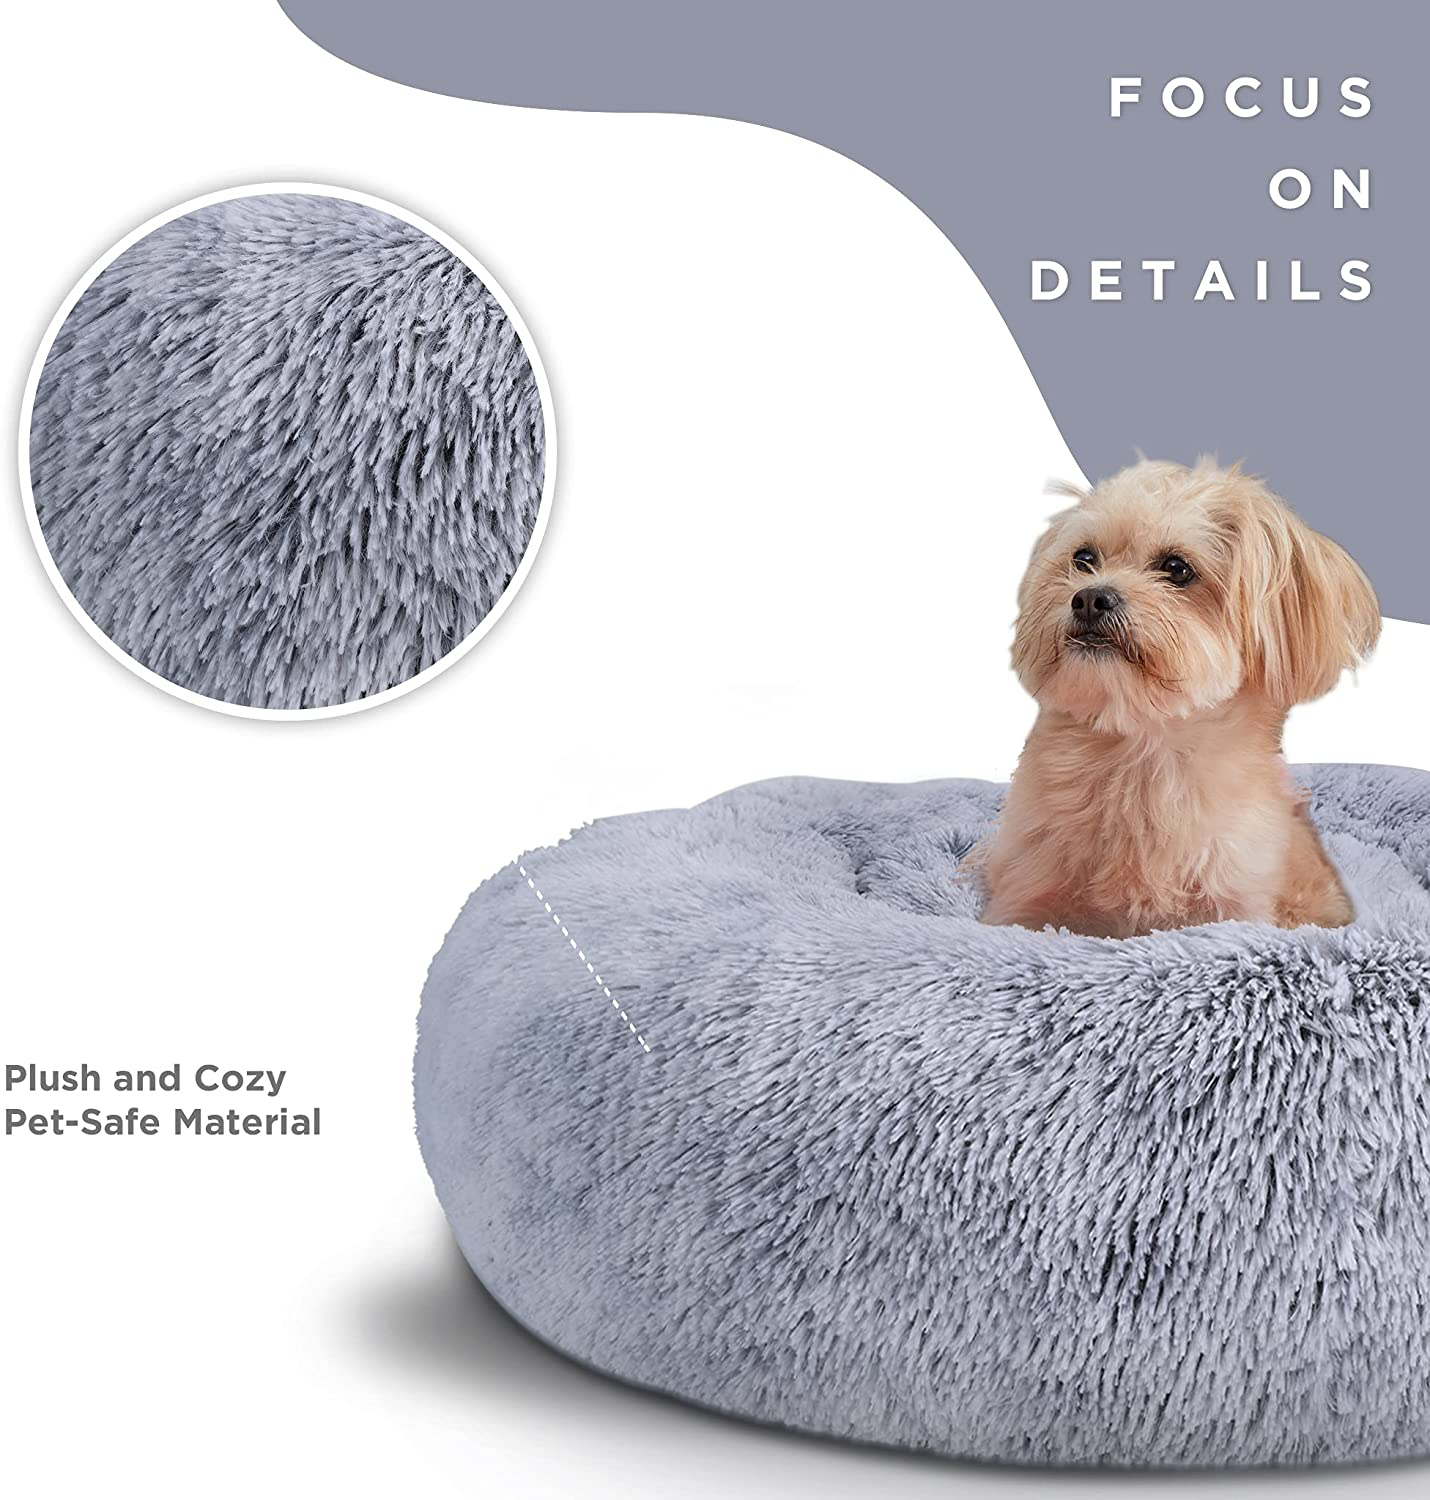 WAYIMPRESS Calming Dog Bed for Small Dog&Cat ,Comfy Self Warming round Dog Bed with Fluffy Faux Fur for anti Anxiety and Cozy